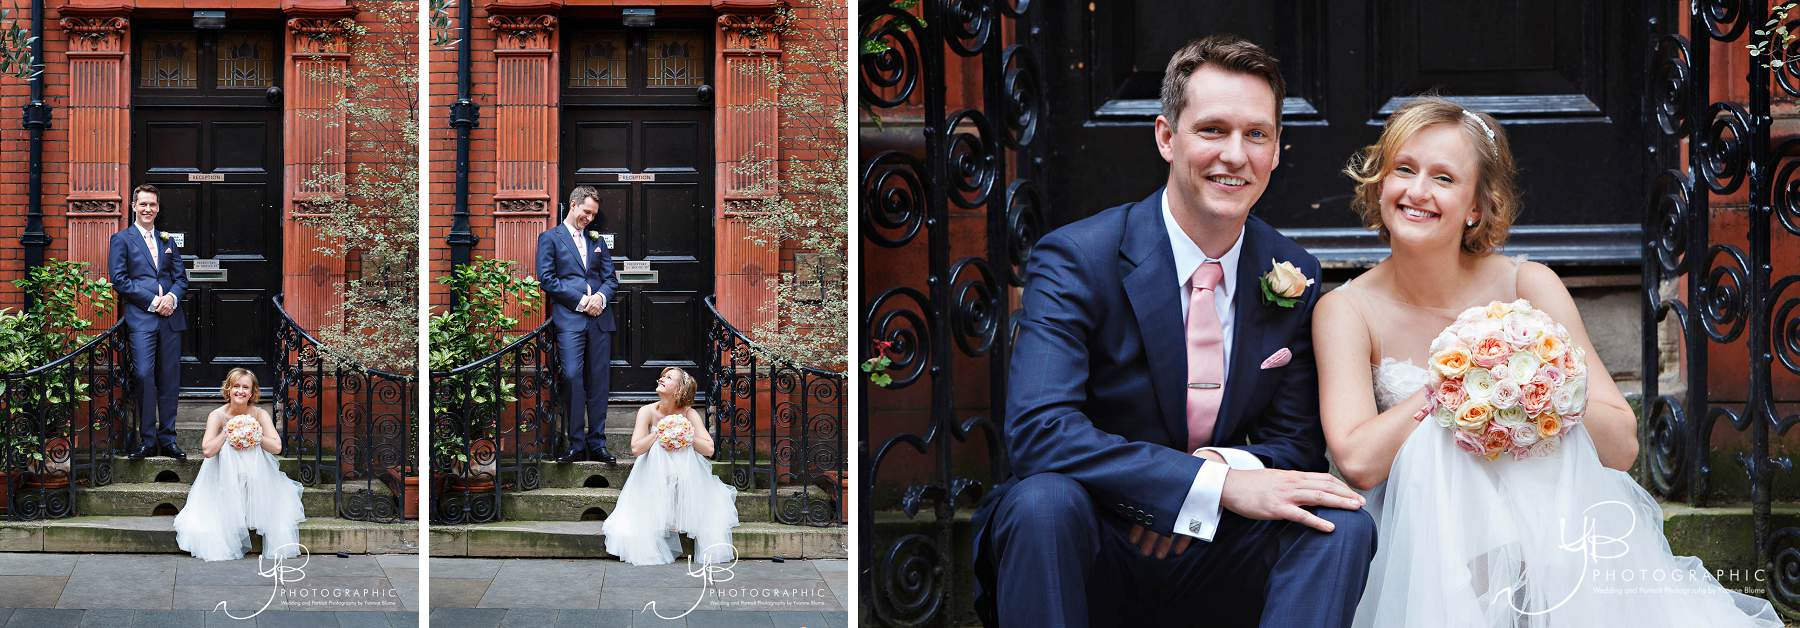 Wedding Portraits in Mounts Street Gardens after Mayfair Library summer wedding ceremony